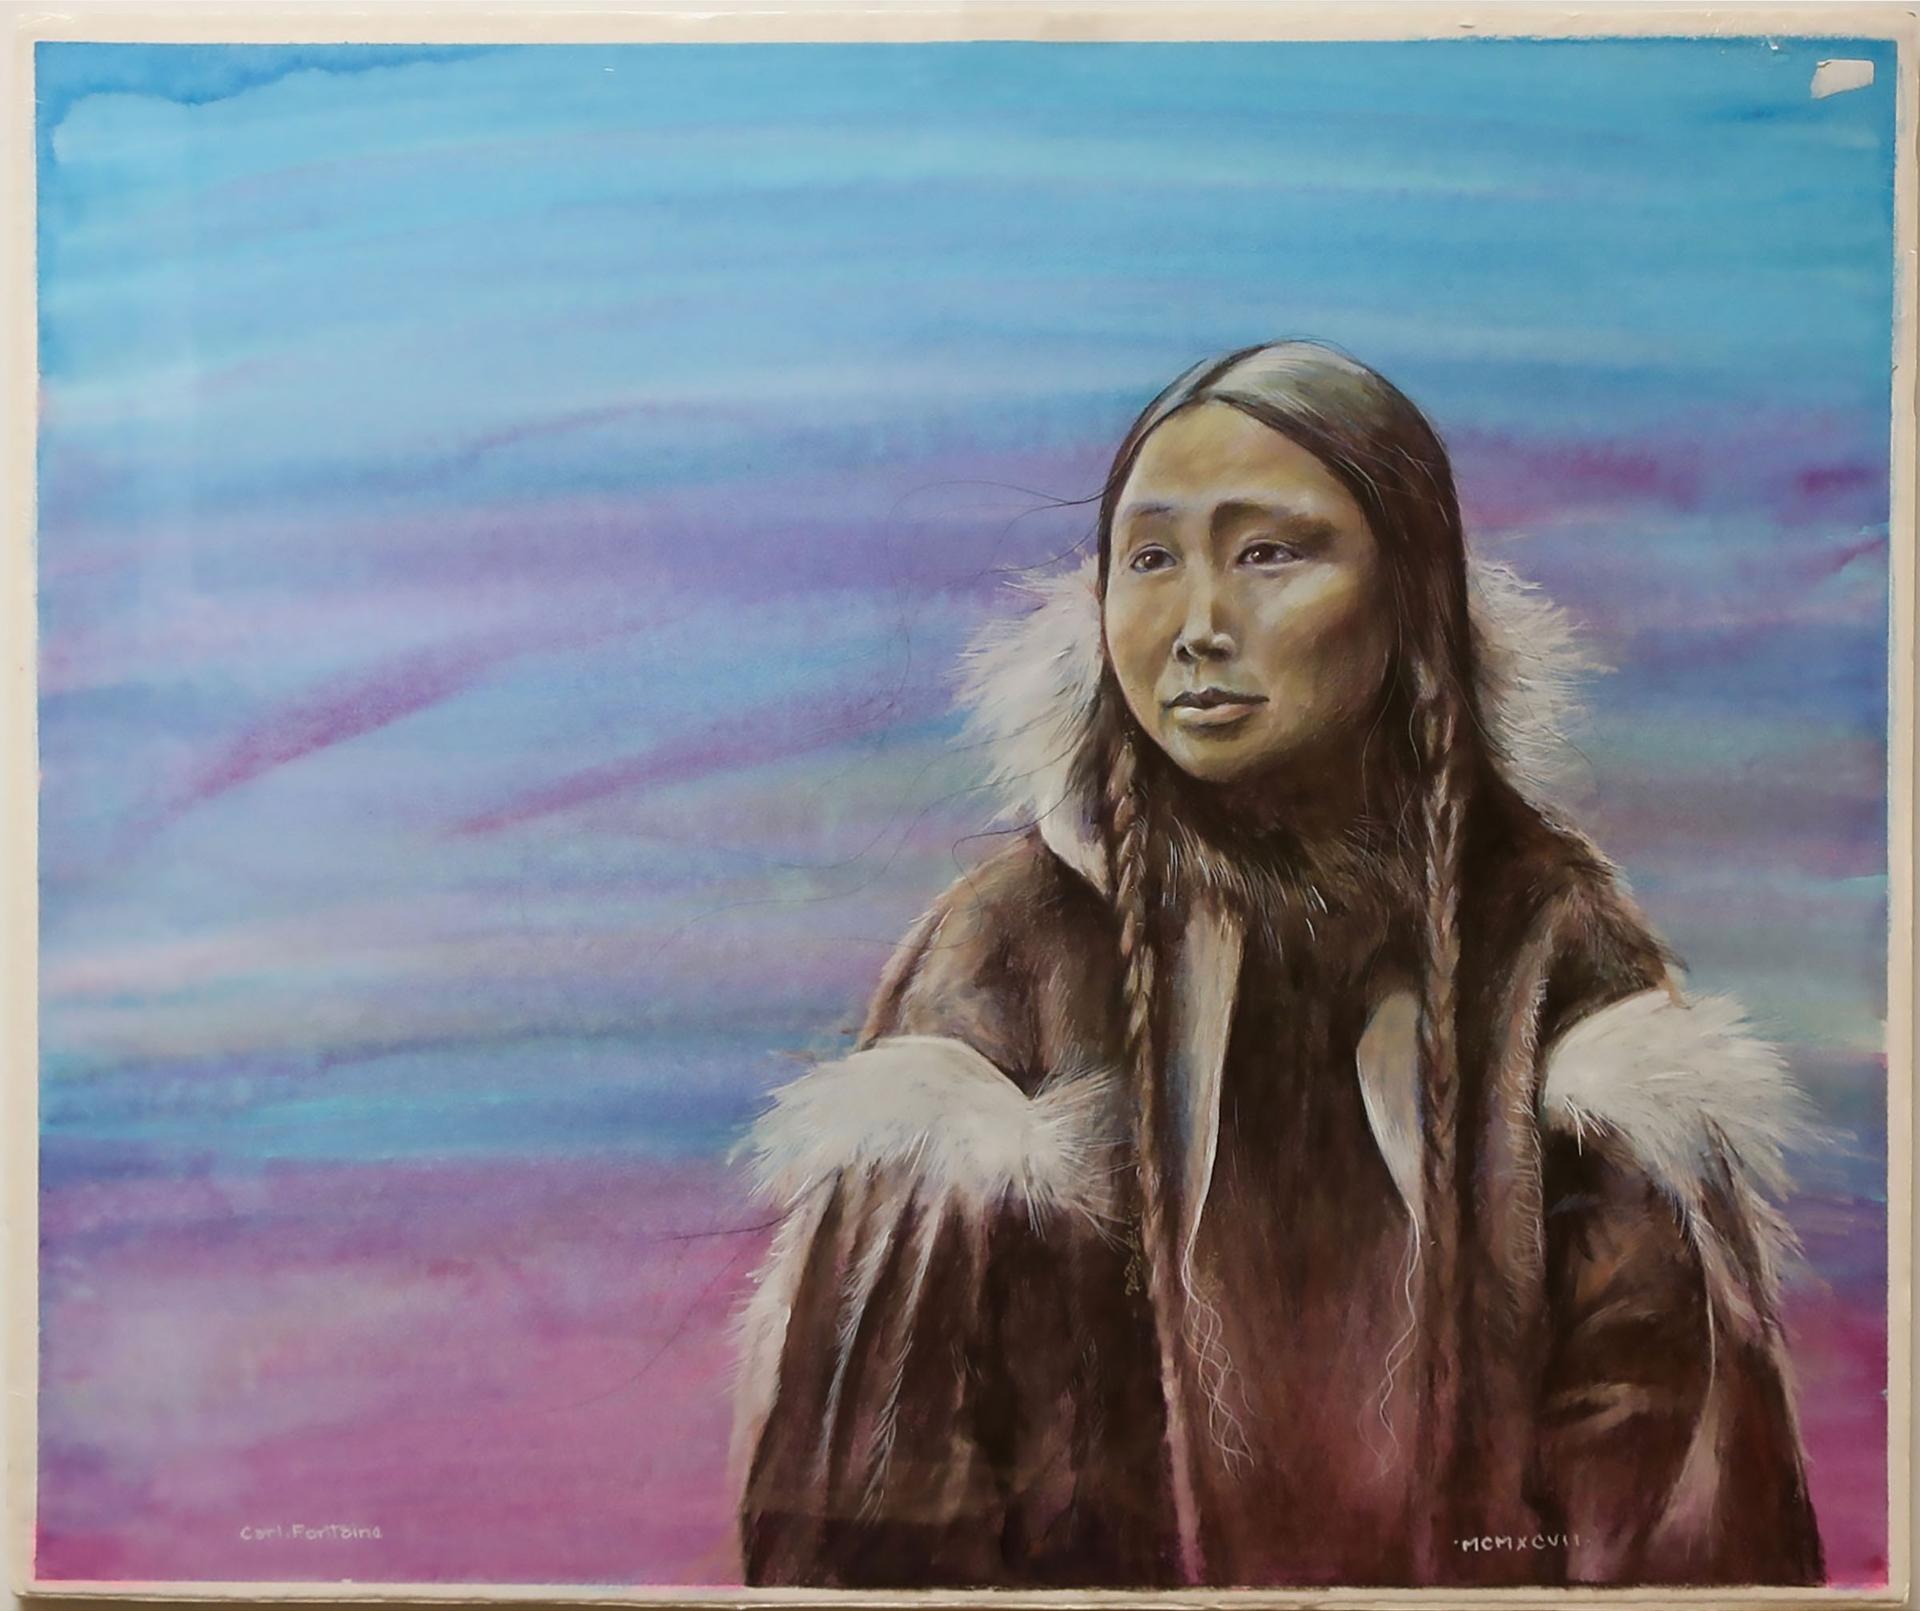 Carl Fontaine - Portrait Of A Young Inuit Woman